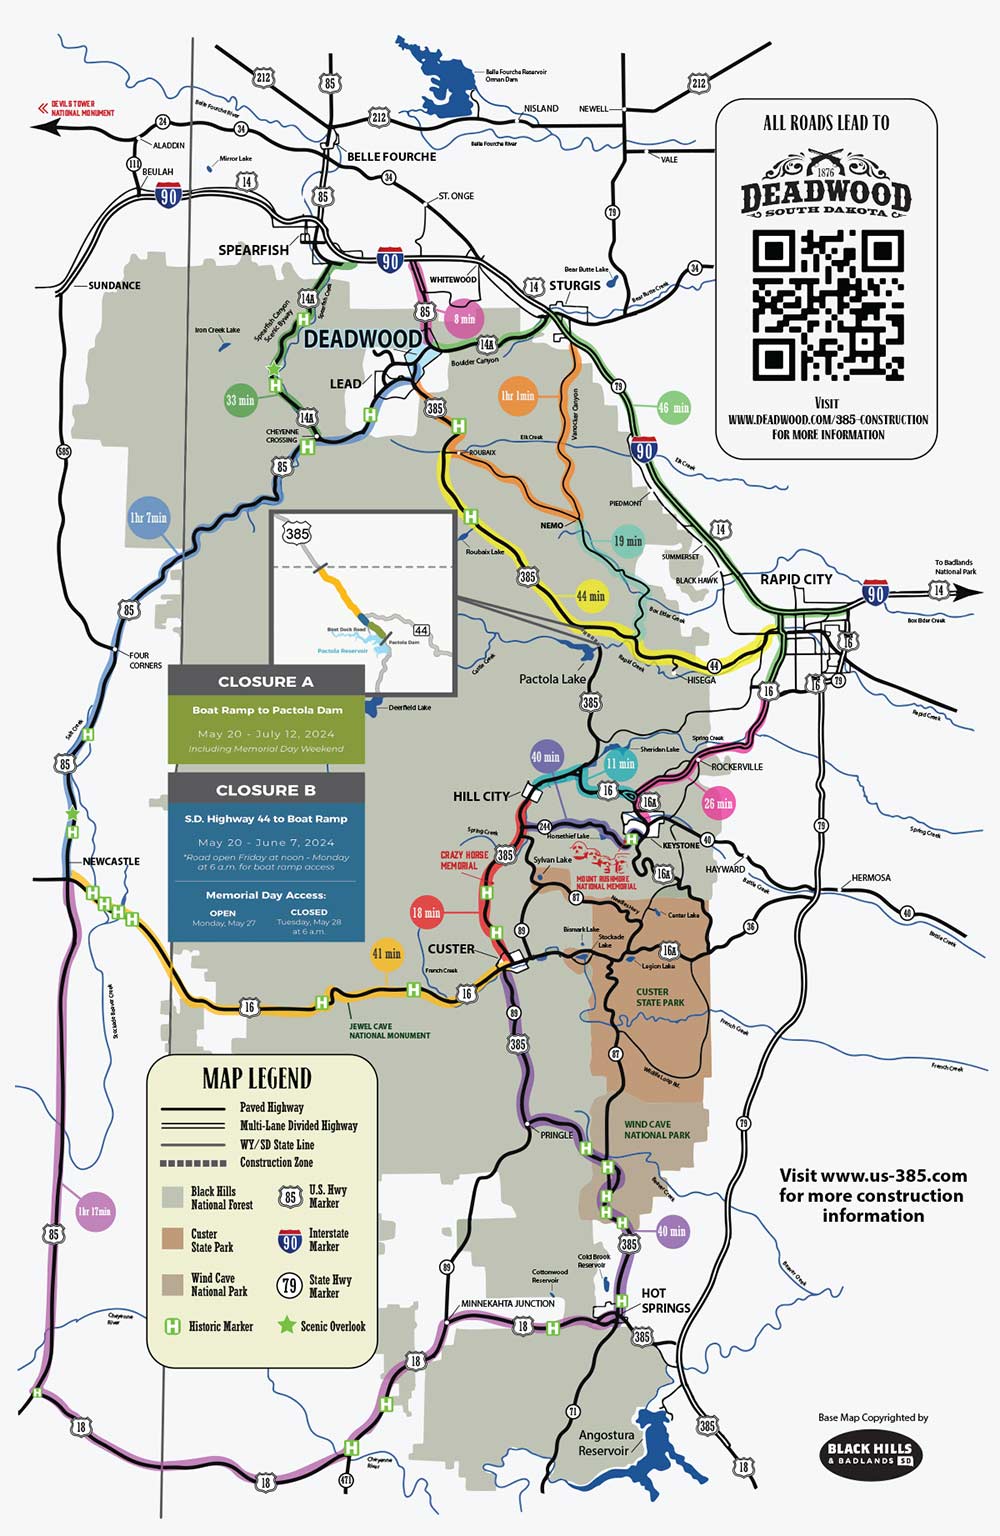 Highway 385 Construction Map Alternative Routes